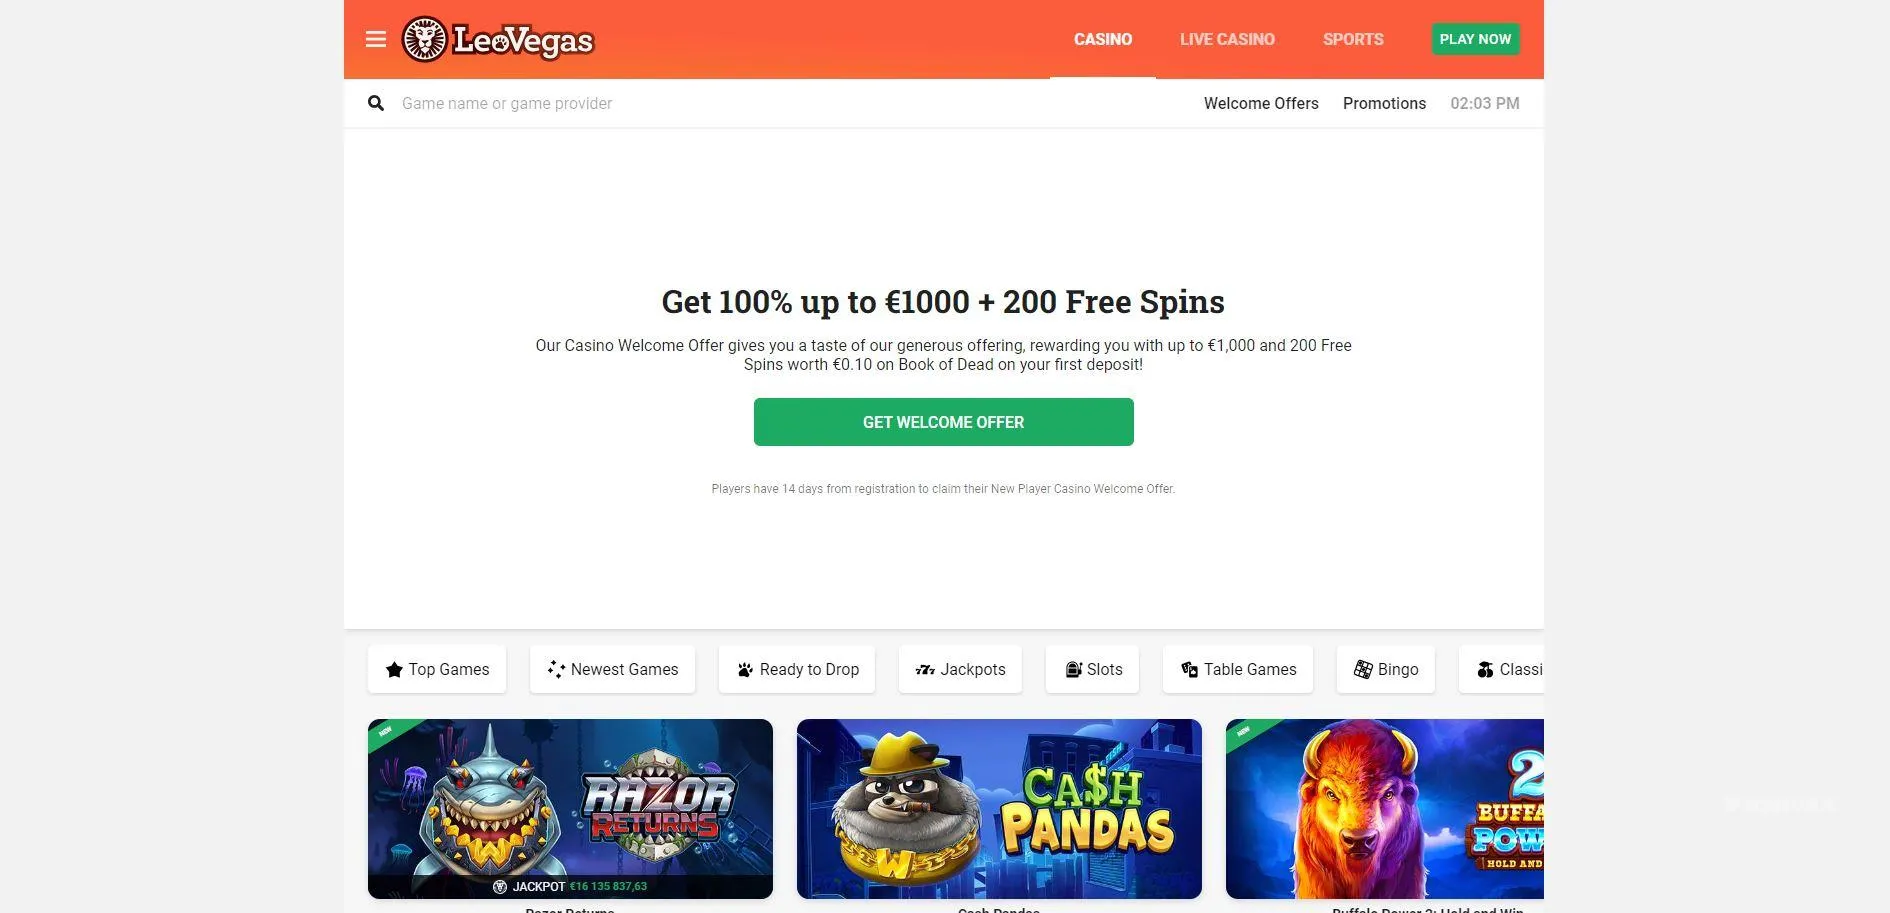 leovegas online casino fast withdrawal welcome bonus offer irish online casino welcome bonus leovegas